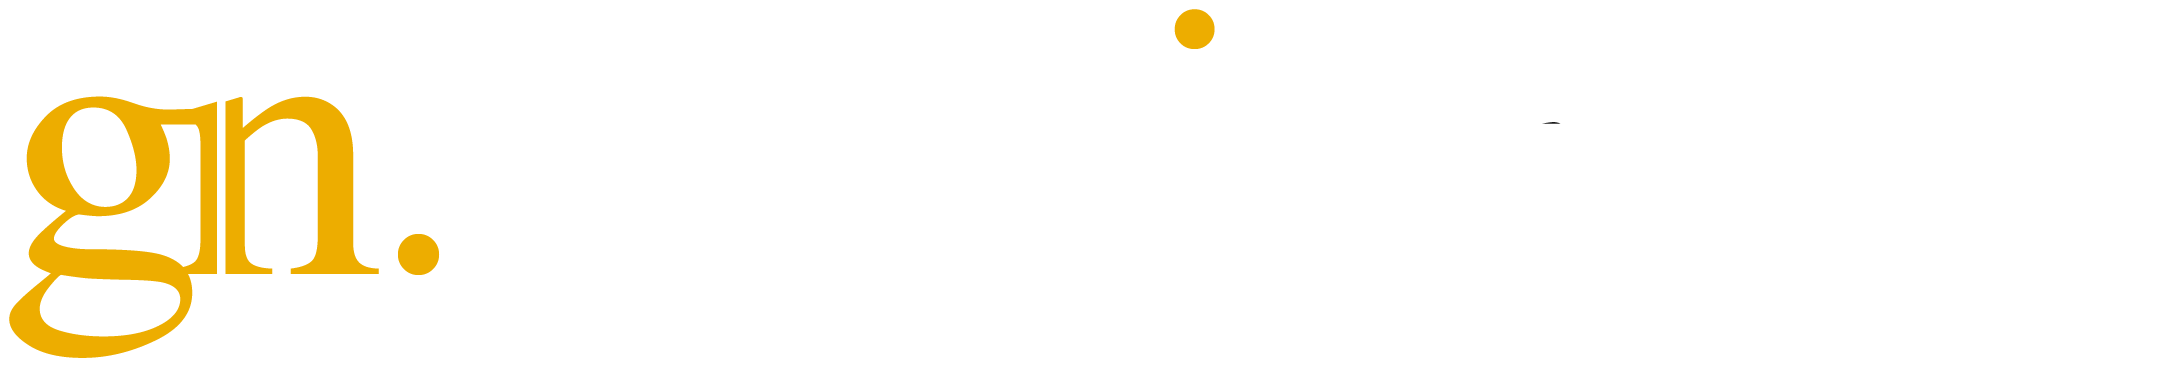 GN Media Group - Digital Marketing Agency For Local Business Marketing